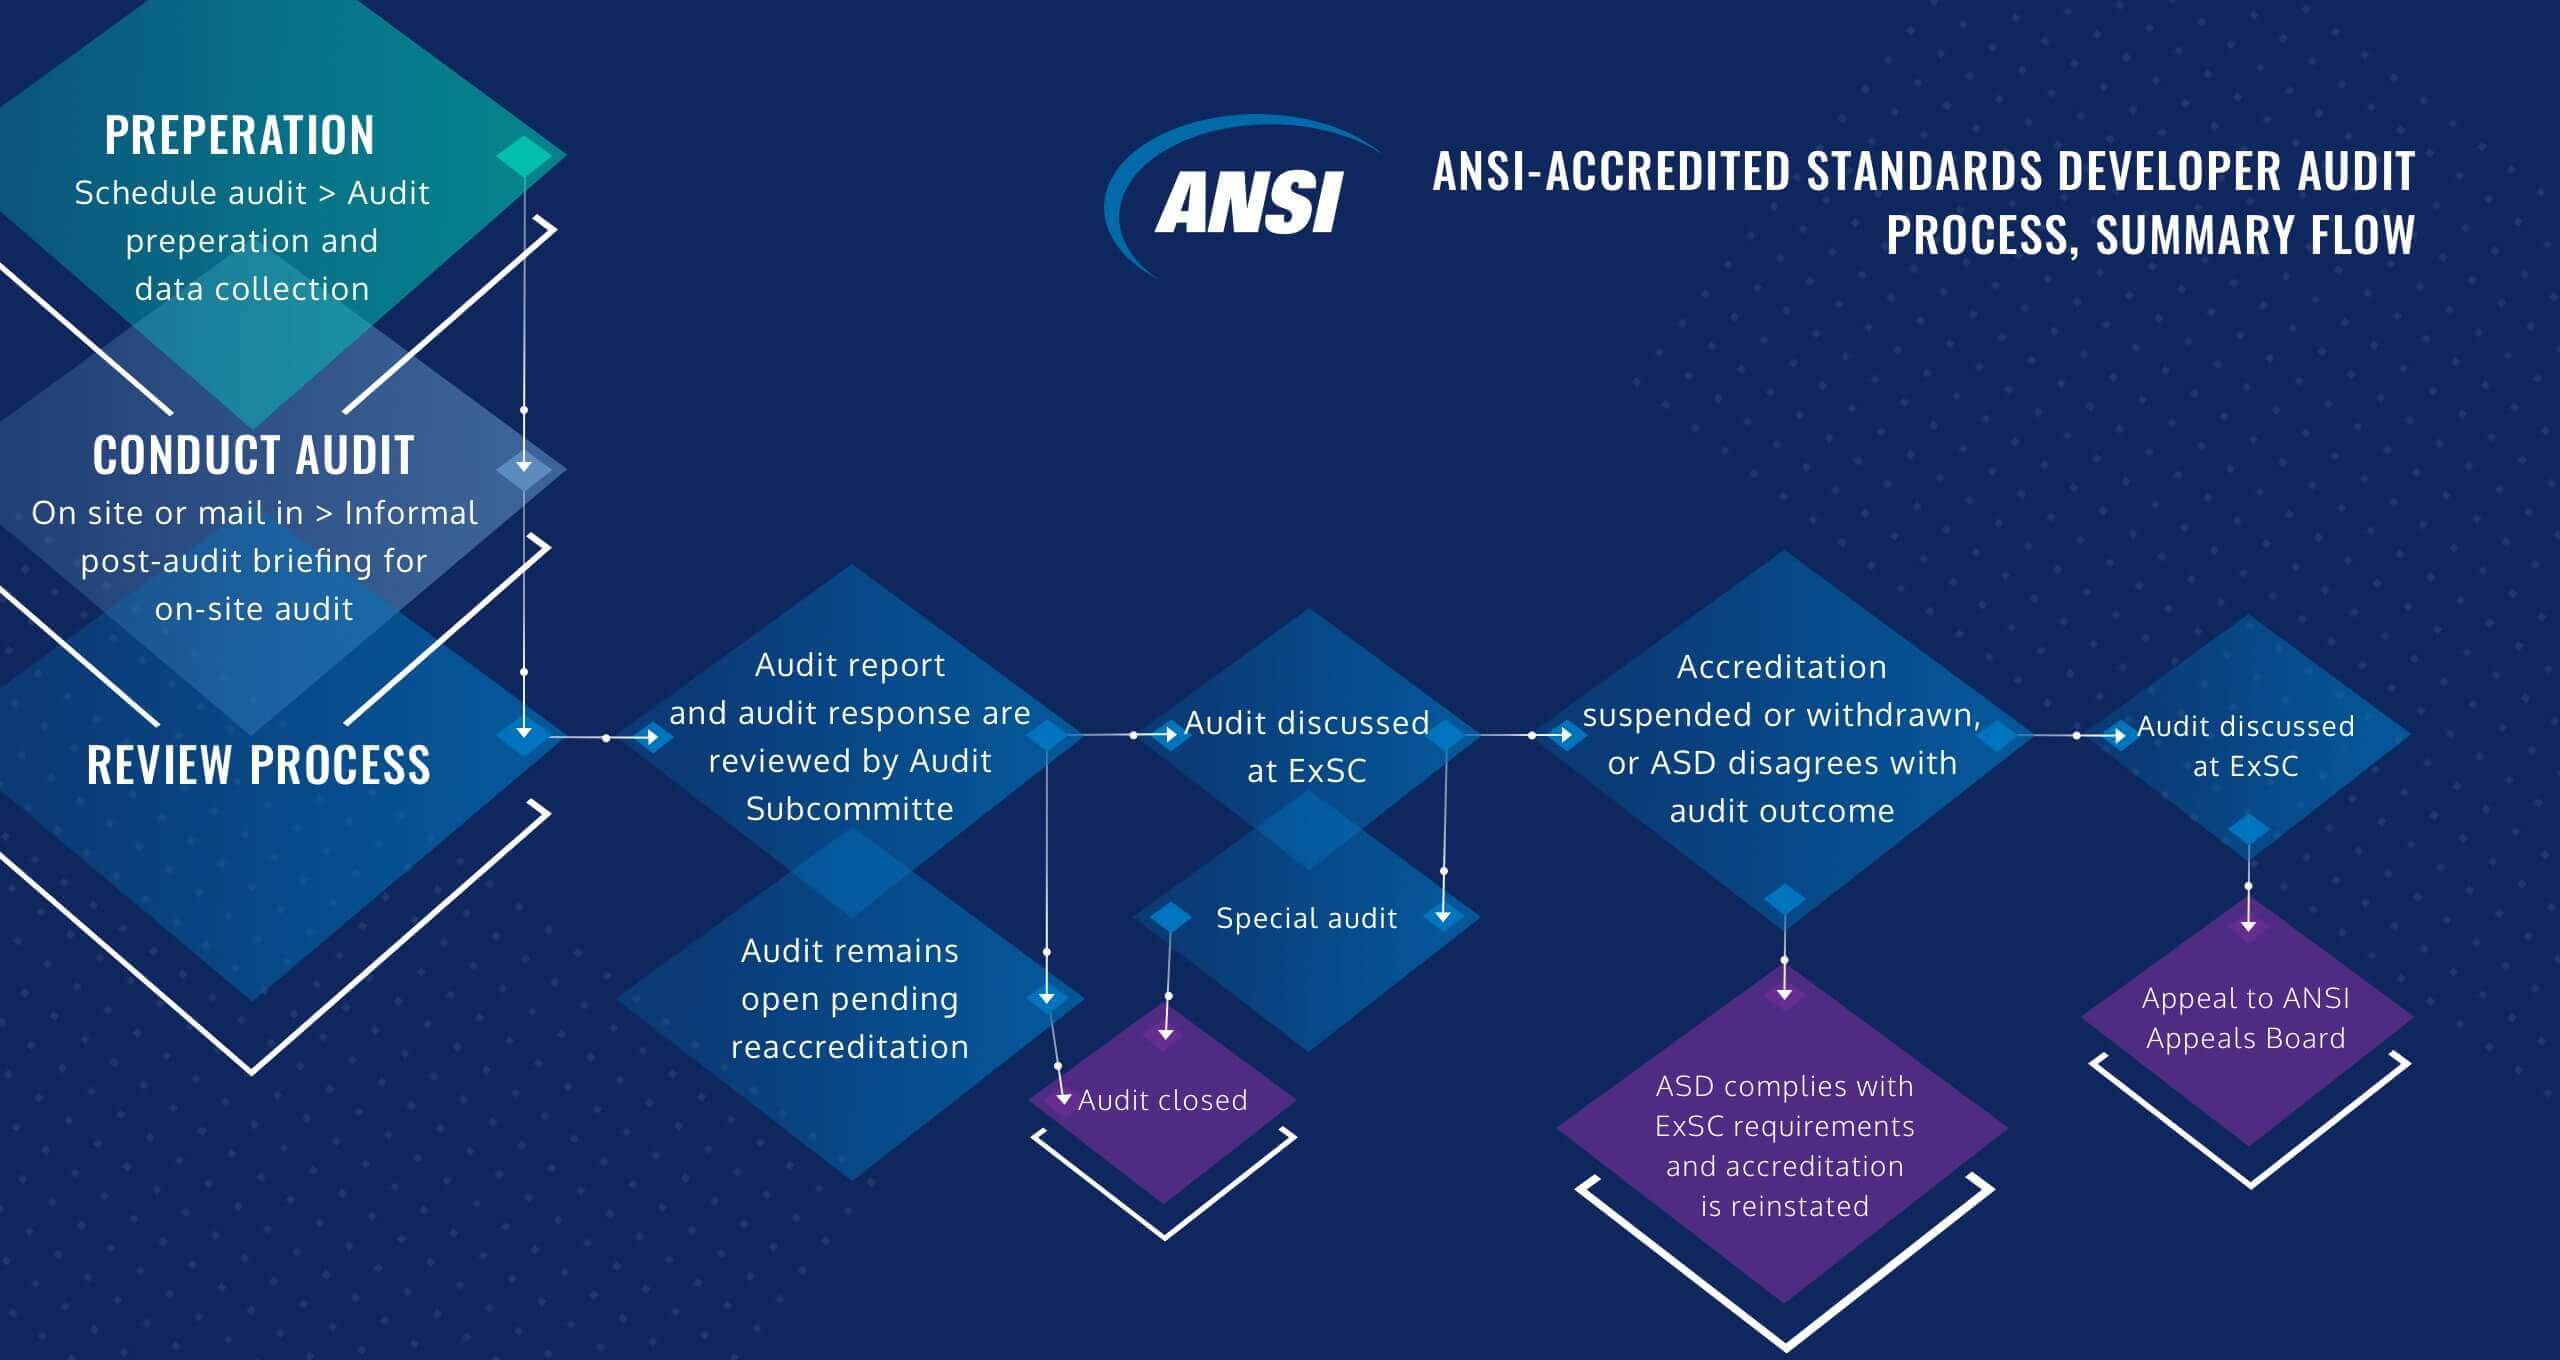 A flow-chart showing a summary of the ANSI-Accredited Standards Developer Audit Process.